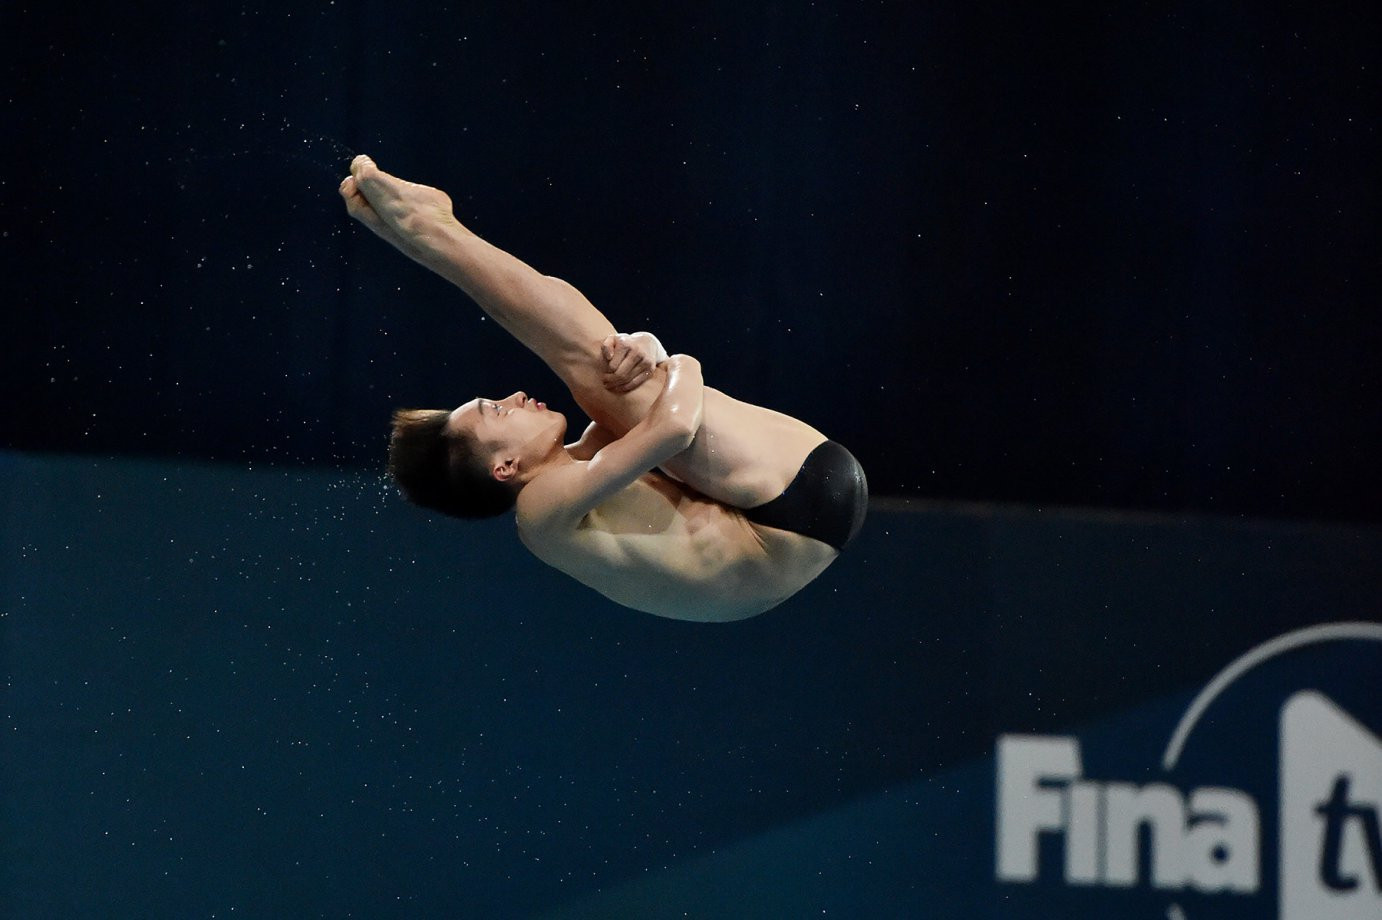 Lian Junjie added a 14th and final gold for China in the boys' A class platform event in the FINA World Junior Diving Championships in Kyiv ©FINA